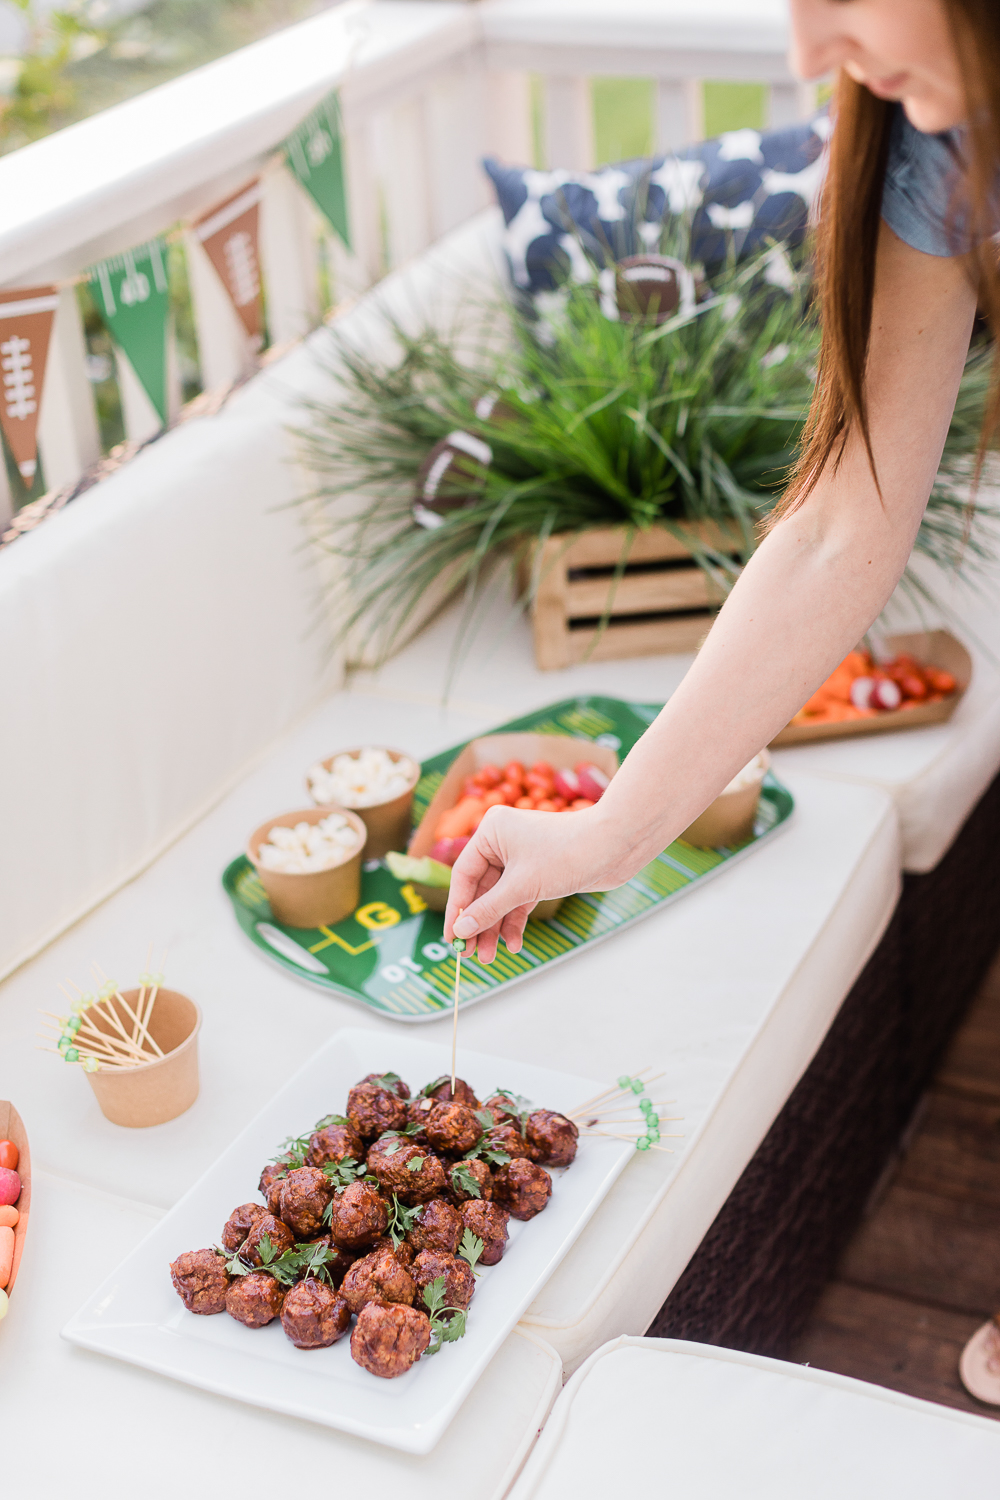 baked beef meatball recipe from blogger Stephanie Ziajka on Diary of a Debutante